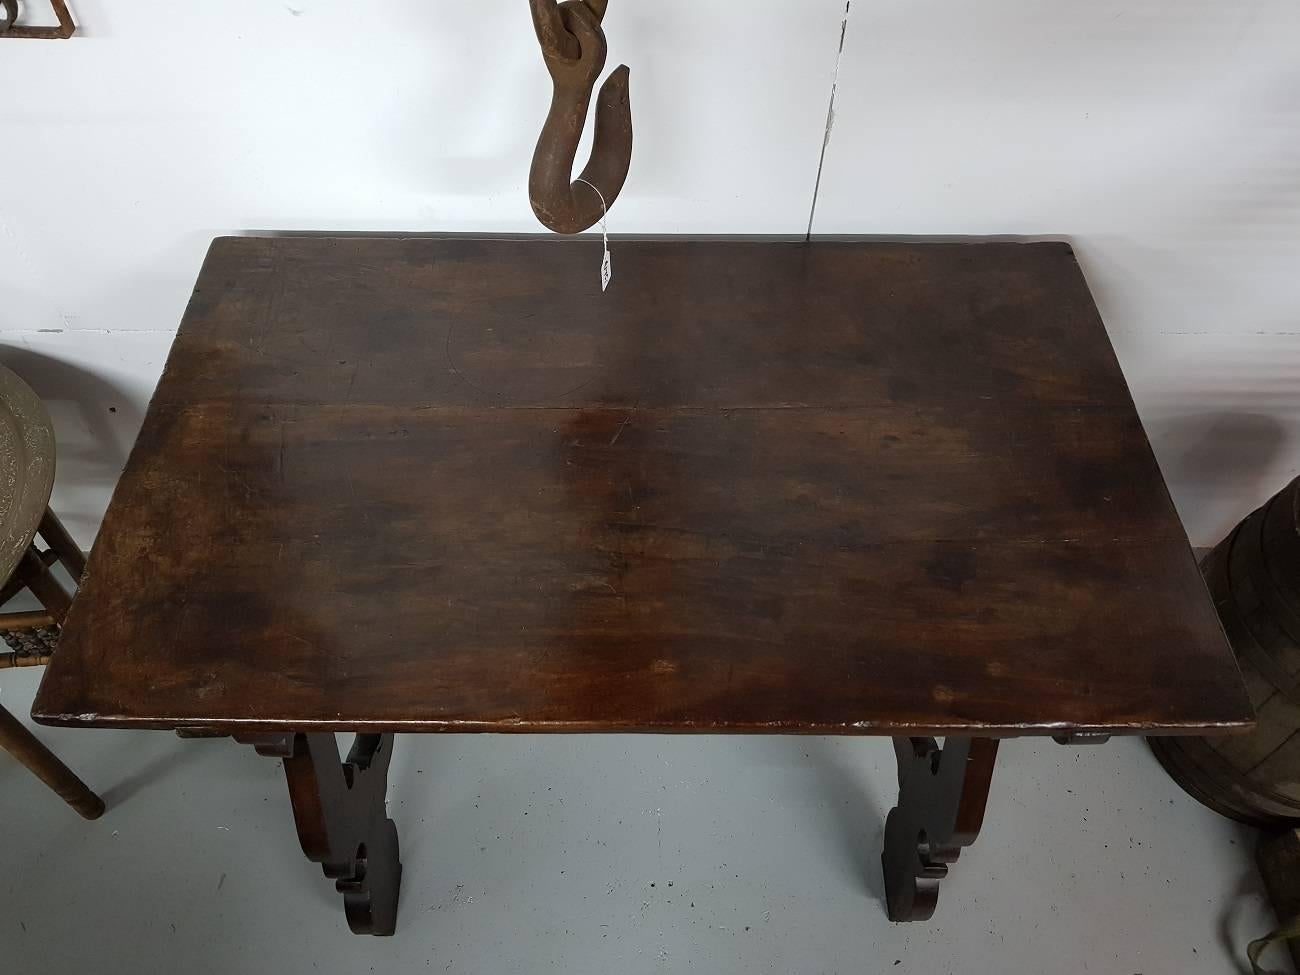 Lovely small size antique Spanish table with a 18th century tabletop and the legs are from the 19th century, because of the size you can put it anywhere.

The measurements are,
Depth 63 cm/ 24.8 inch.
Width 104 cm/ 40.9 inch.
Height 75 cm/ 29.5